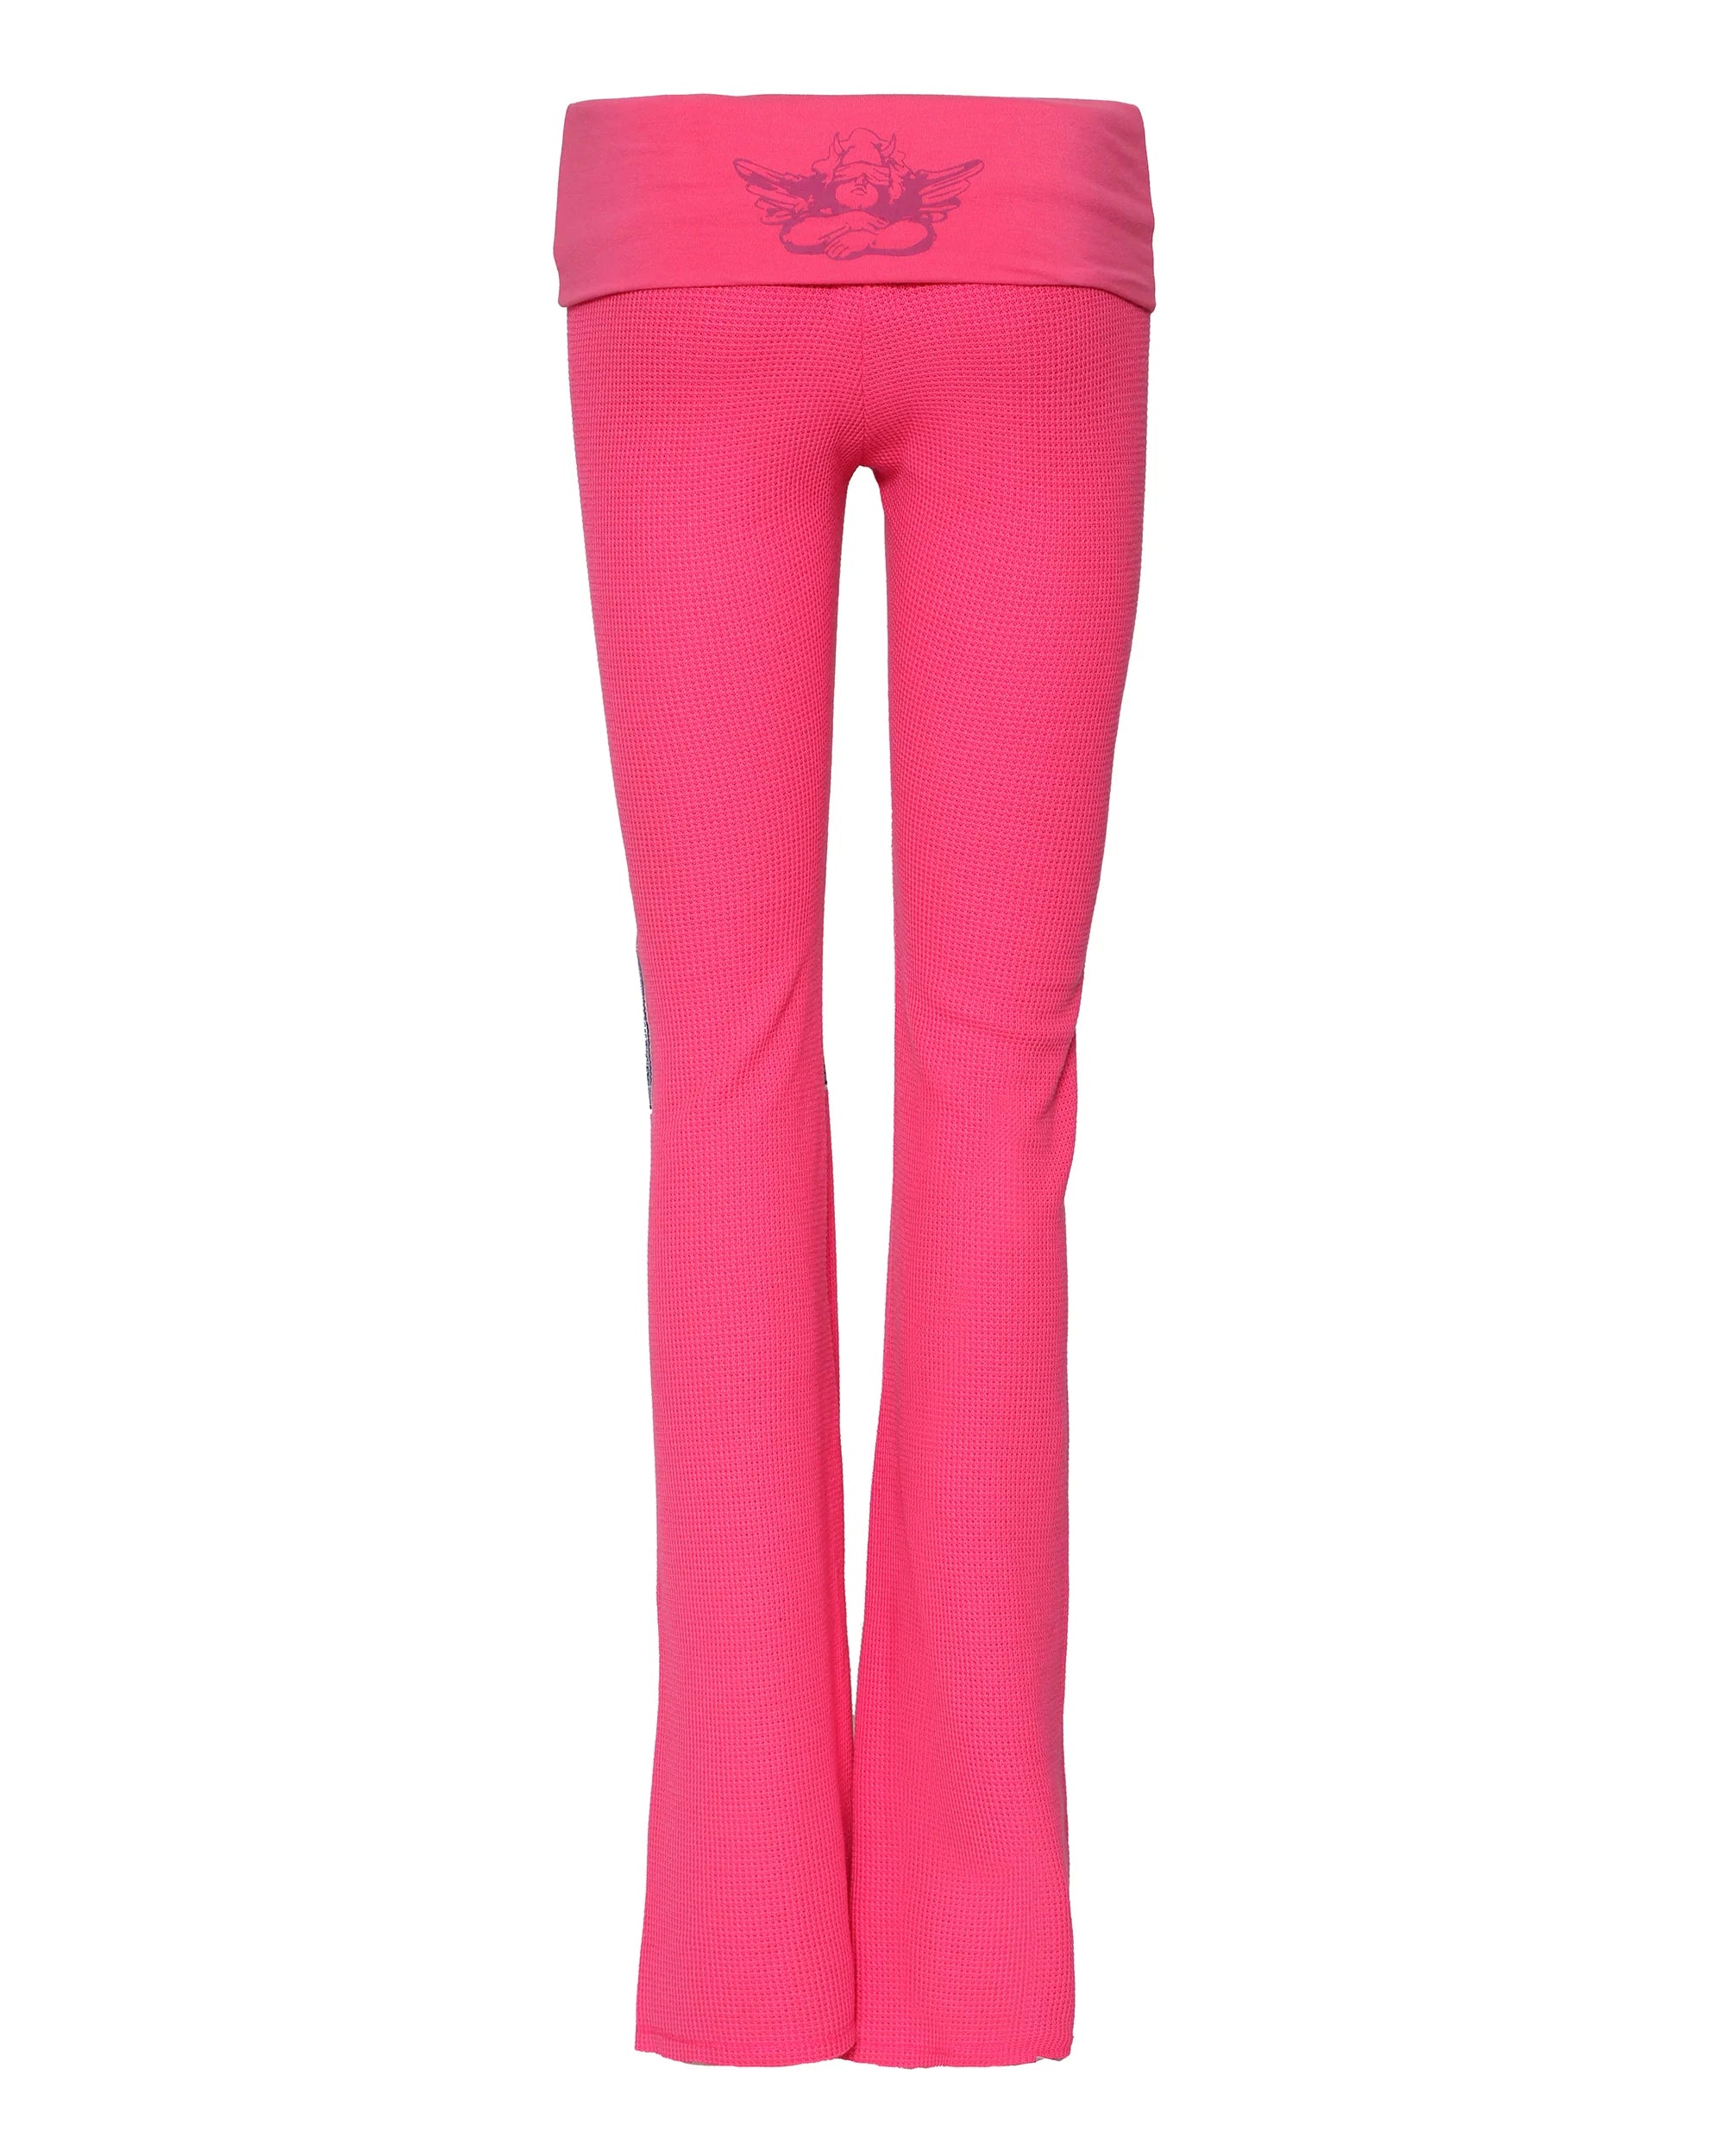 Boys Lie Perfect Match Thermal Pants ☆ Pink – Rock N Rags